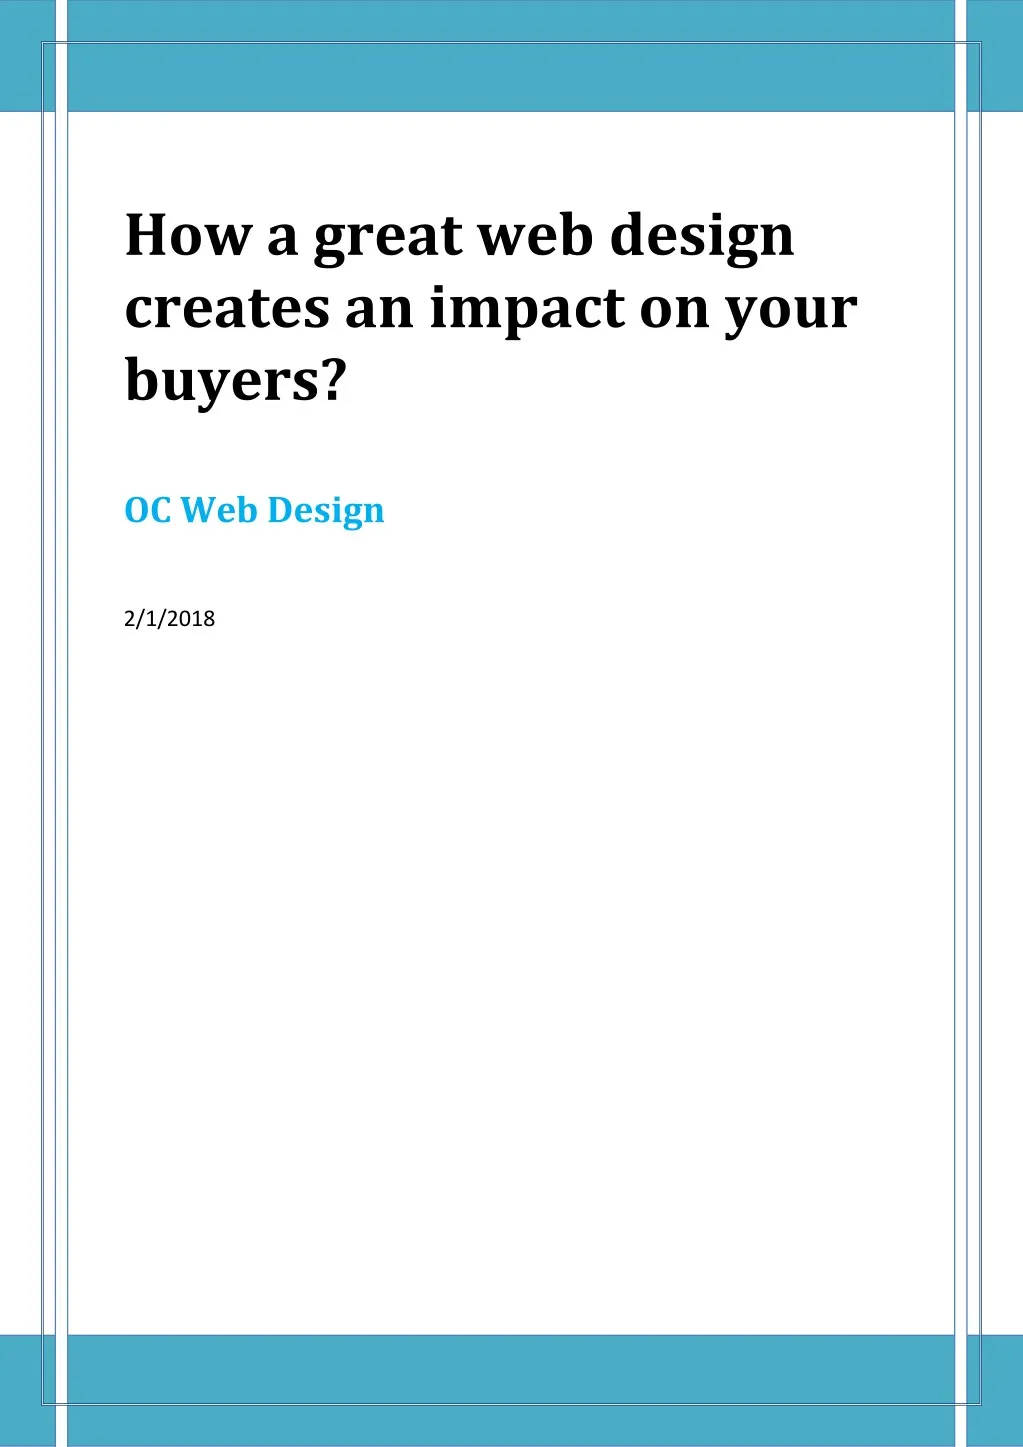 how a great web design creates an impact on your